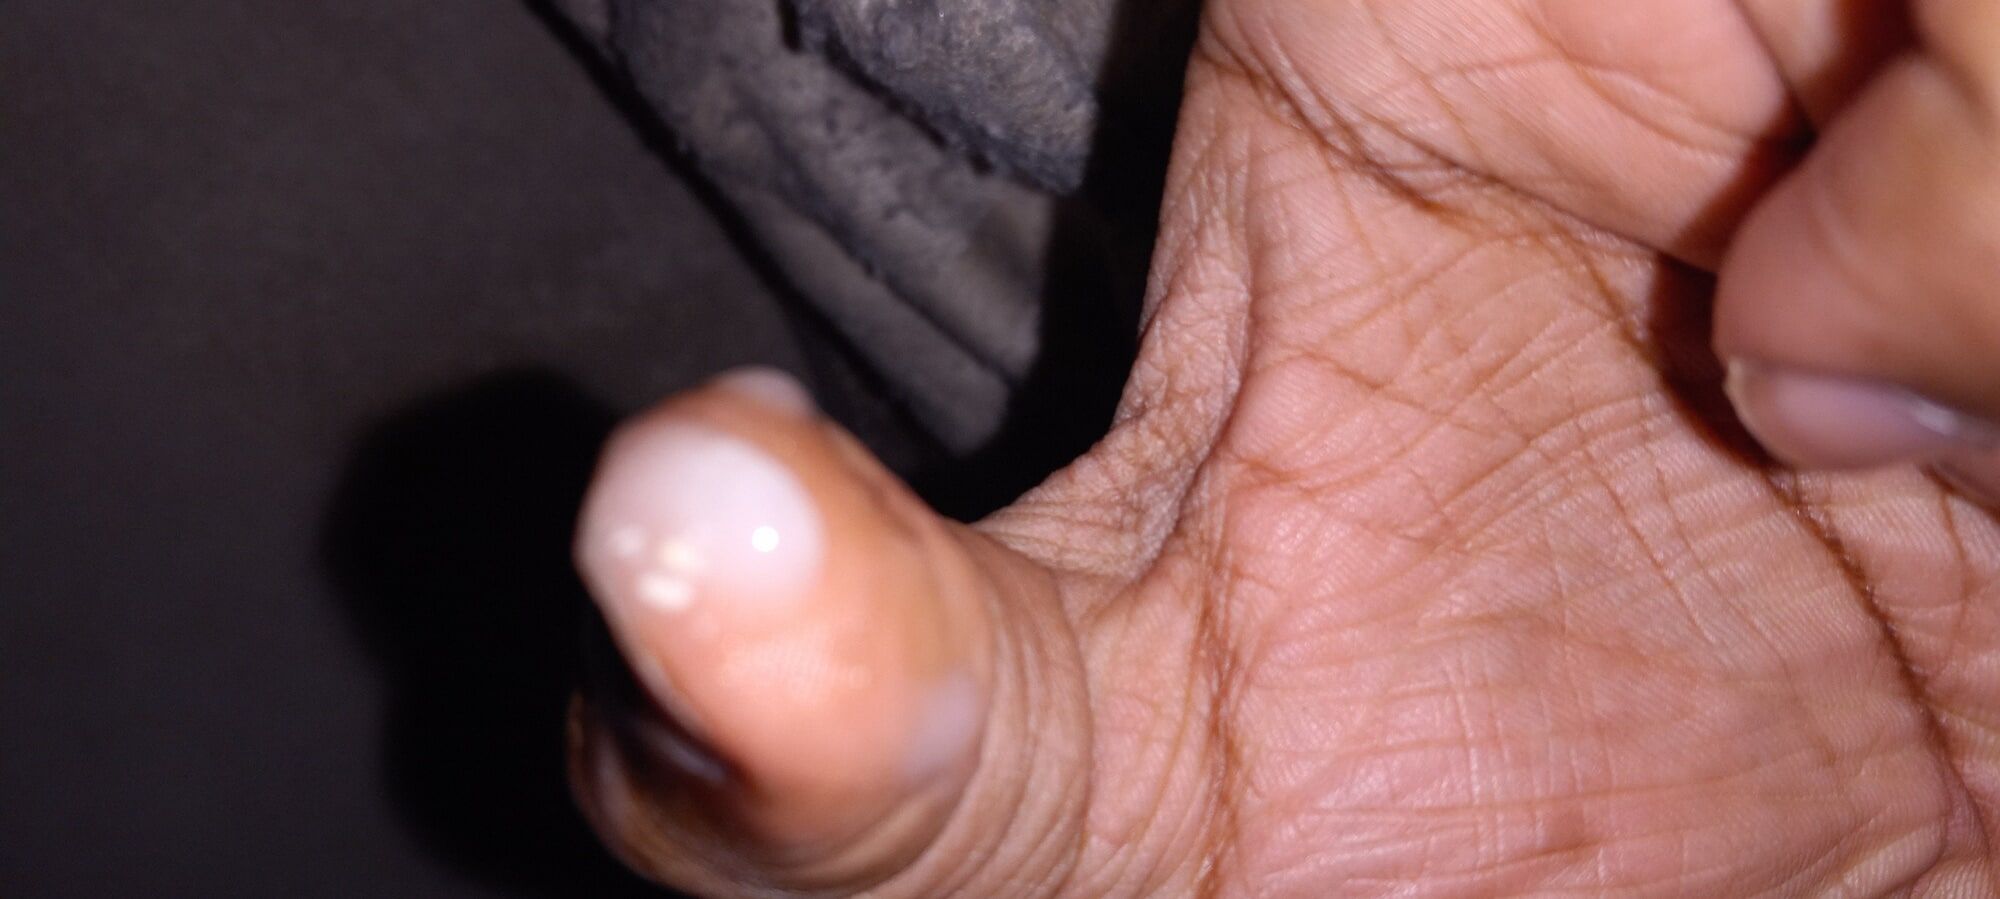 Cum on my thumb and wet on my hands from masturbation #3